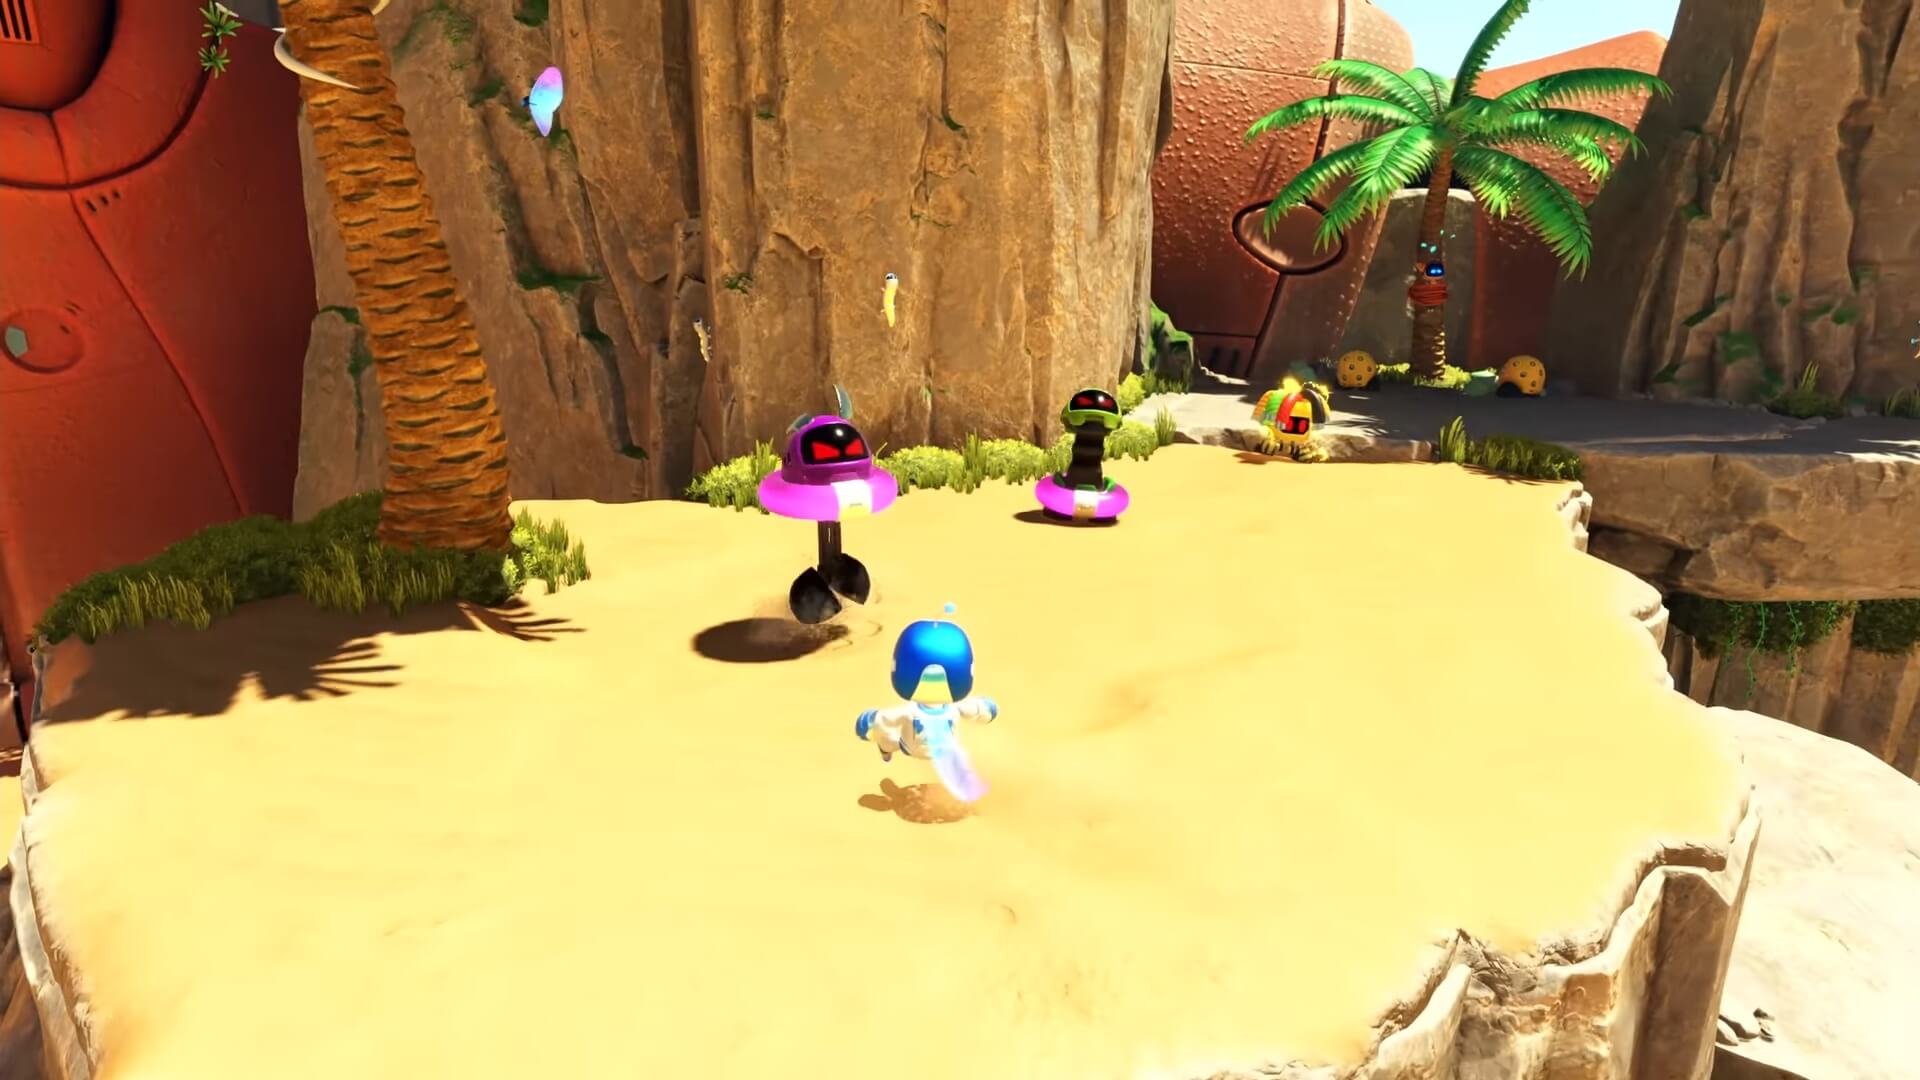 Astro Bot stole my heart | Source: PlayStation (YouTube)